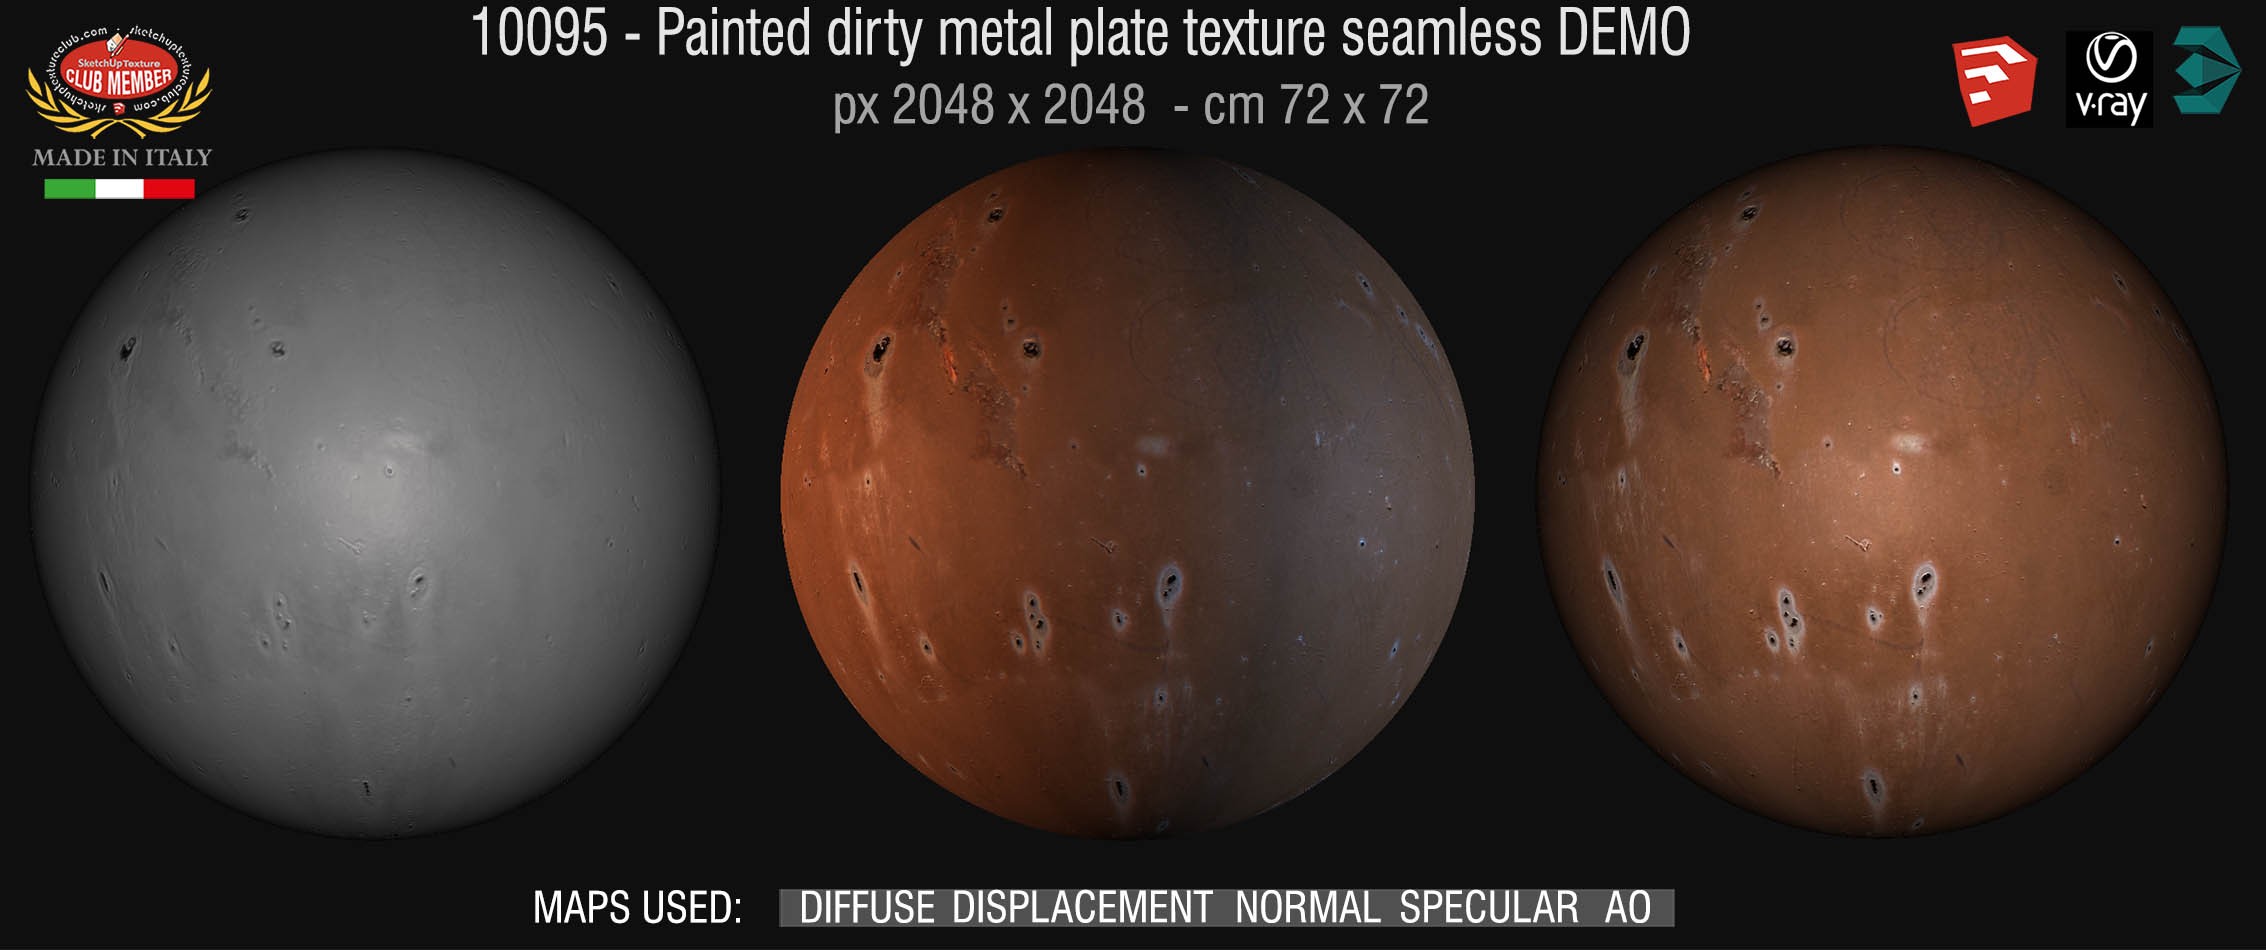 10095 HR Painted dirty metal texture seamless + maps DEMO